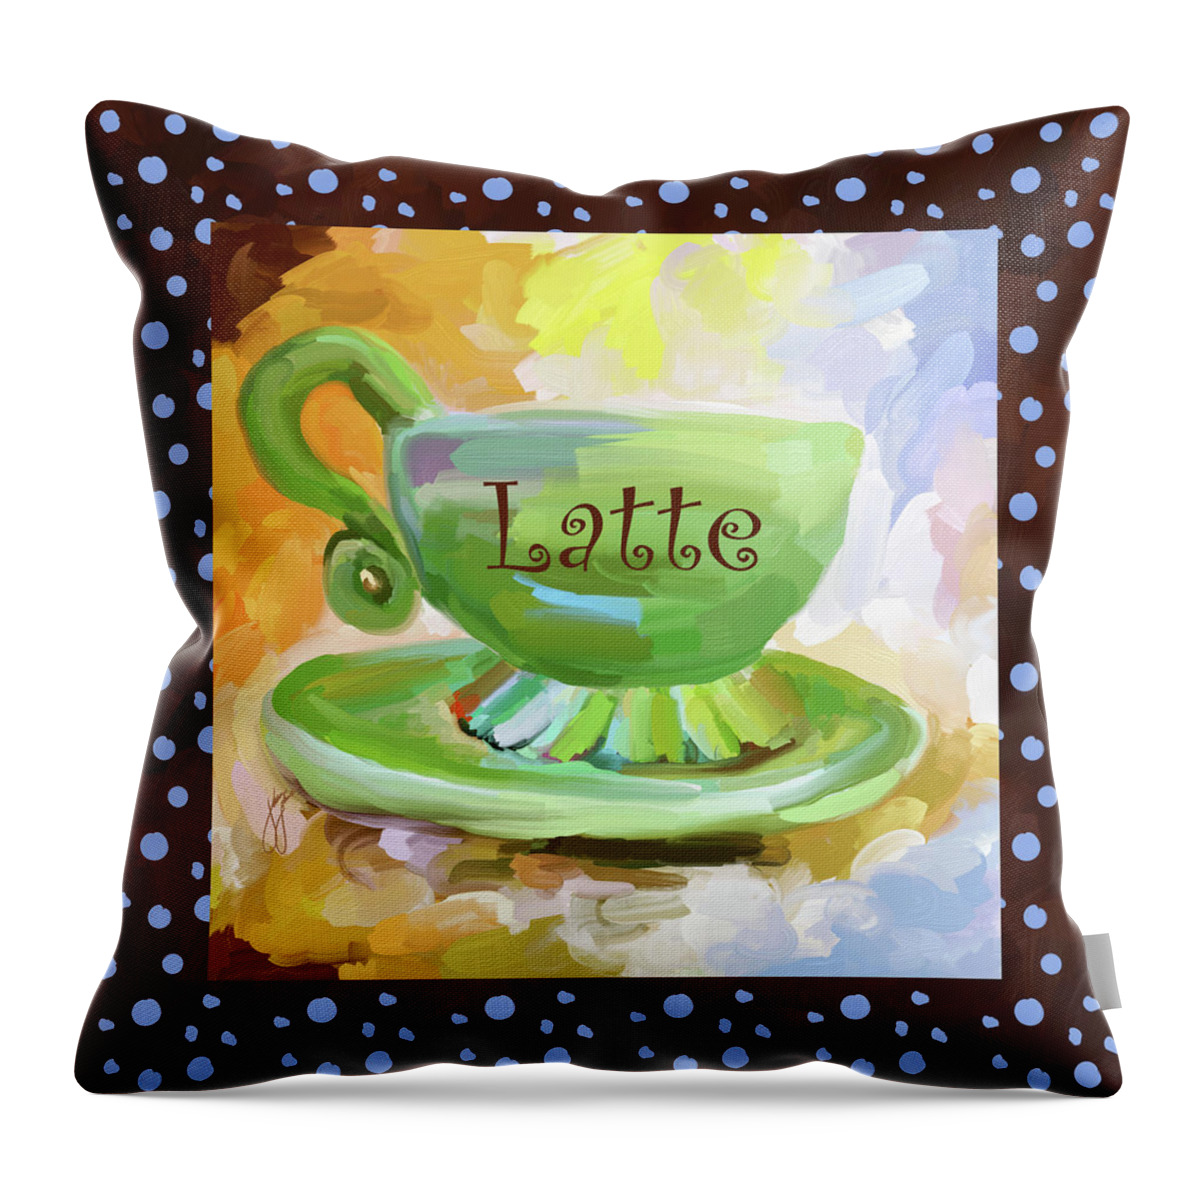 Coffee Throw Pillow featuring the painting Latte Coffee Cup With Blue Dots by Jai Johnson